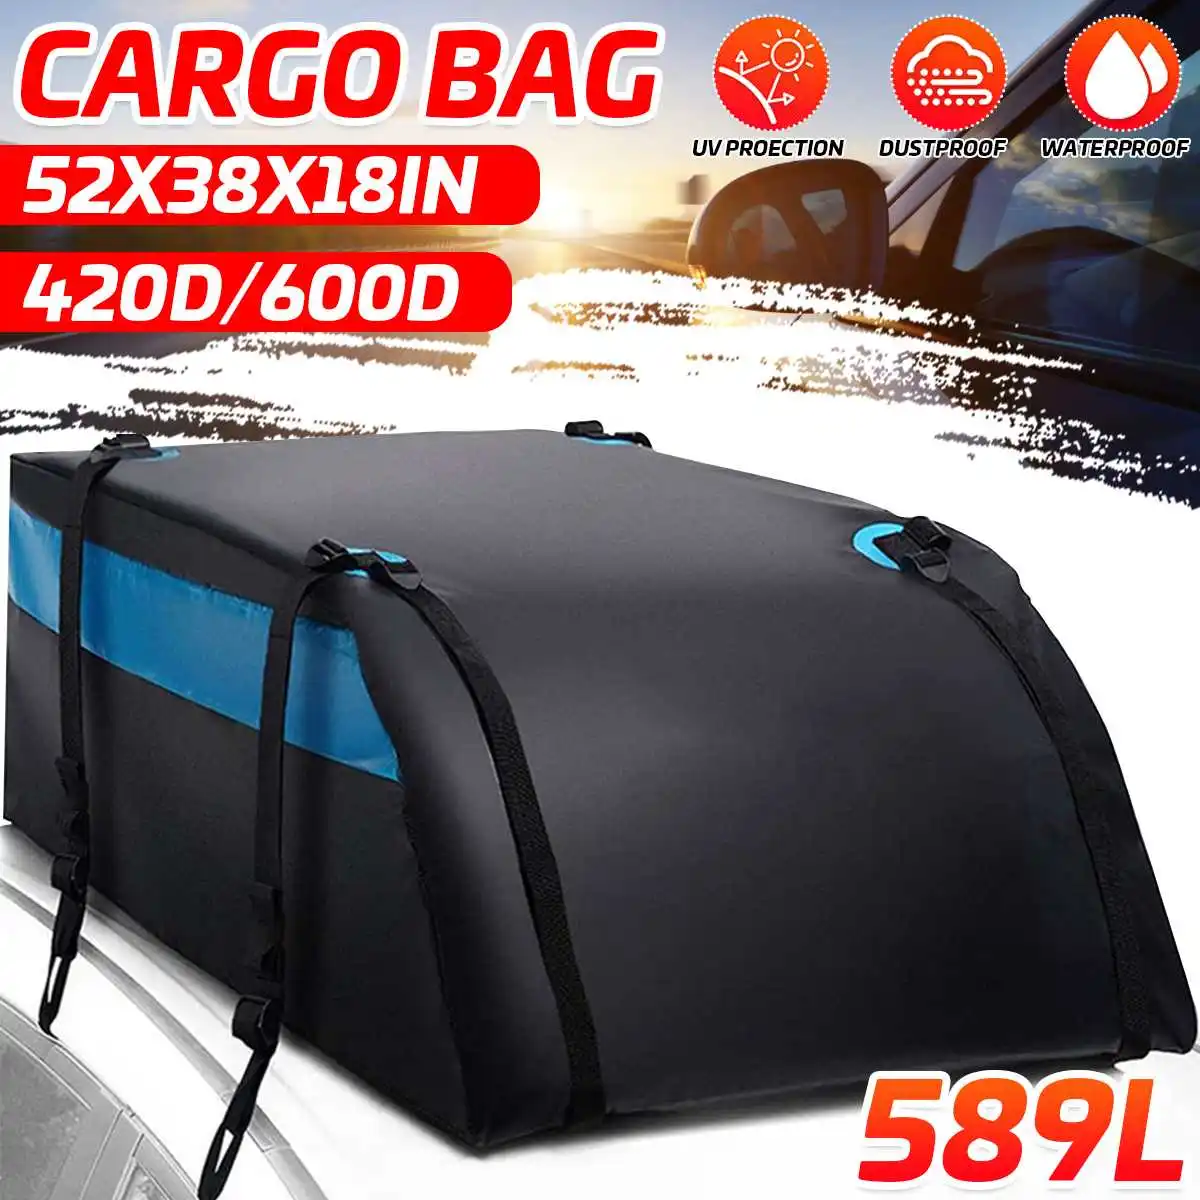 

132x97x46cm 589L Universal Large Waterproof UV Protected Car Cargo Roof Bag Carrier Cargo Luggage Travel Bag For SUV Vehicles